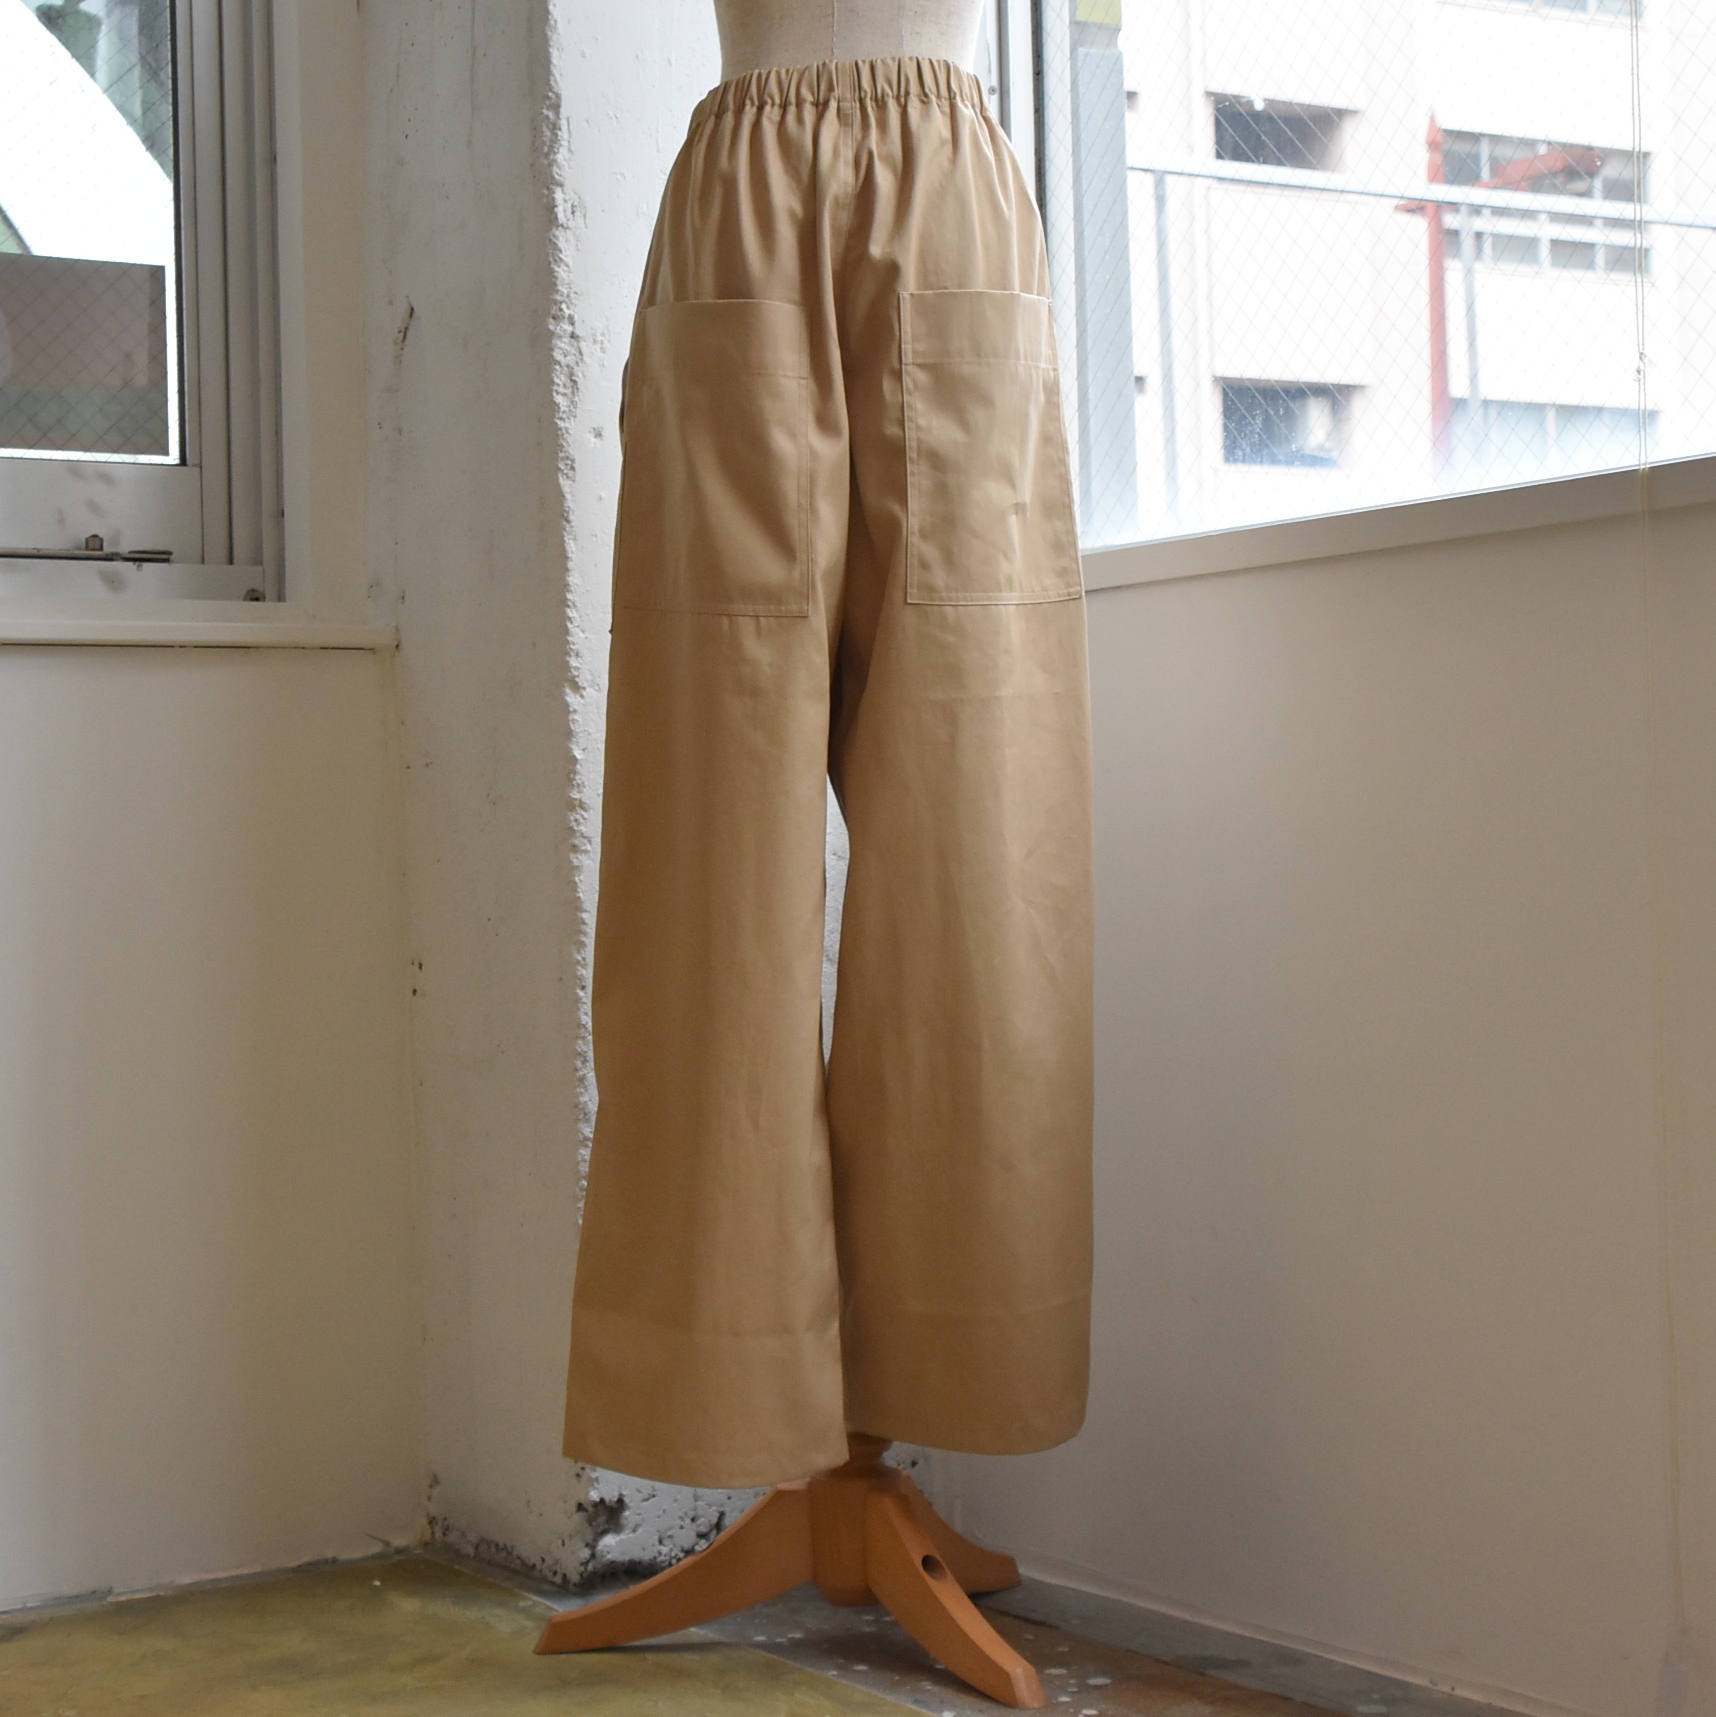 SOFIE D'HOORE(ソフィードール) / POWER Wide pants with big patched pockets(3)